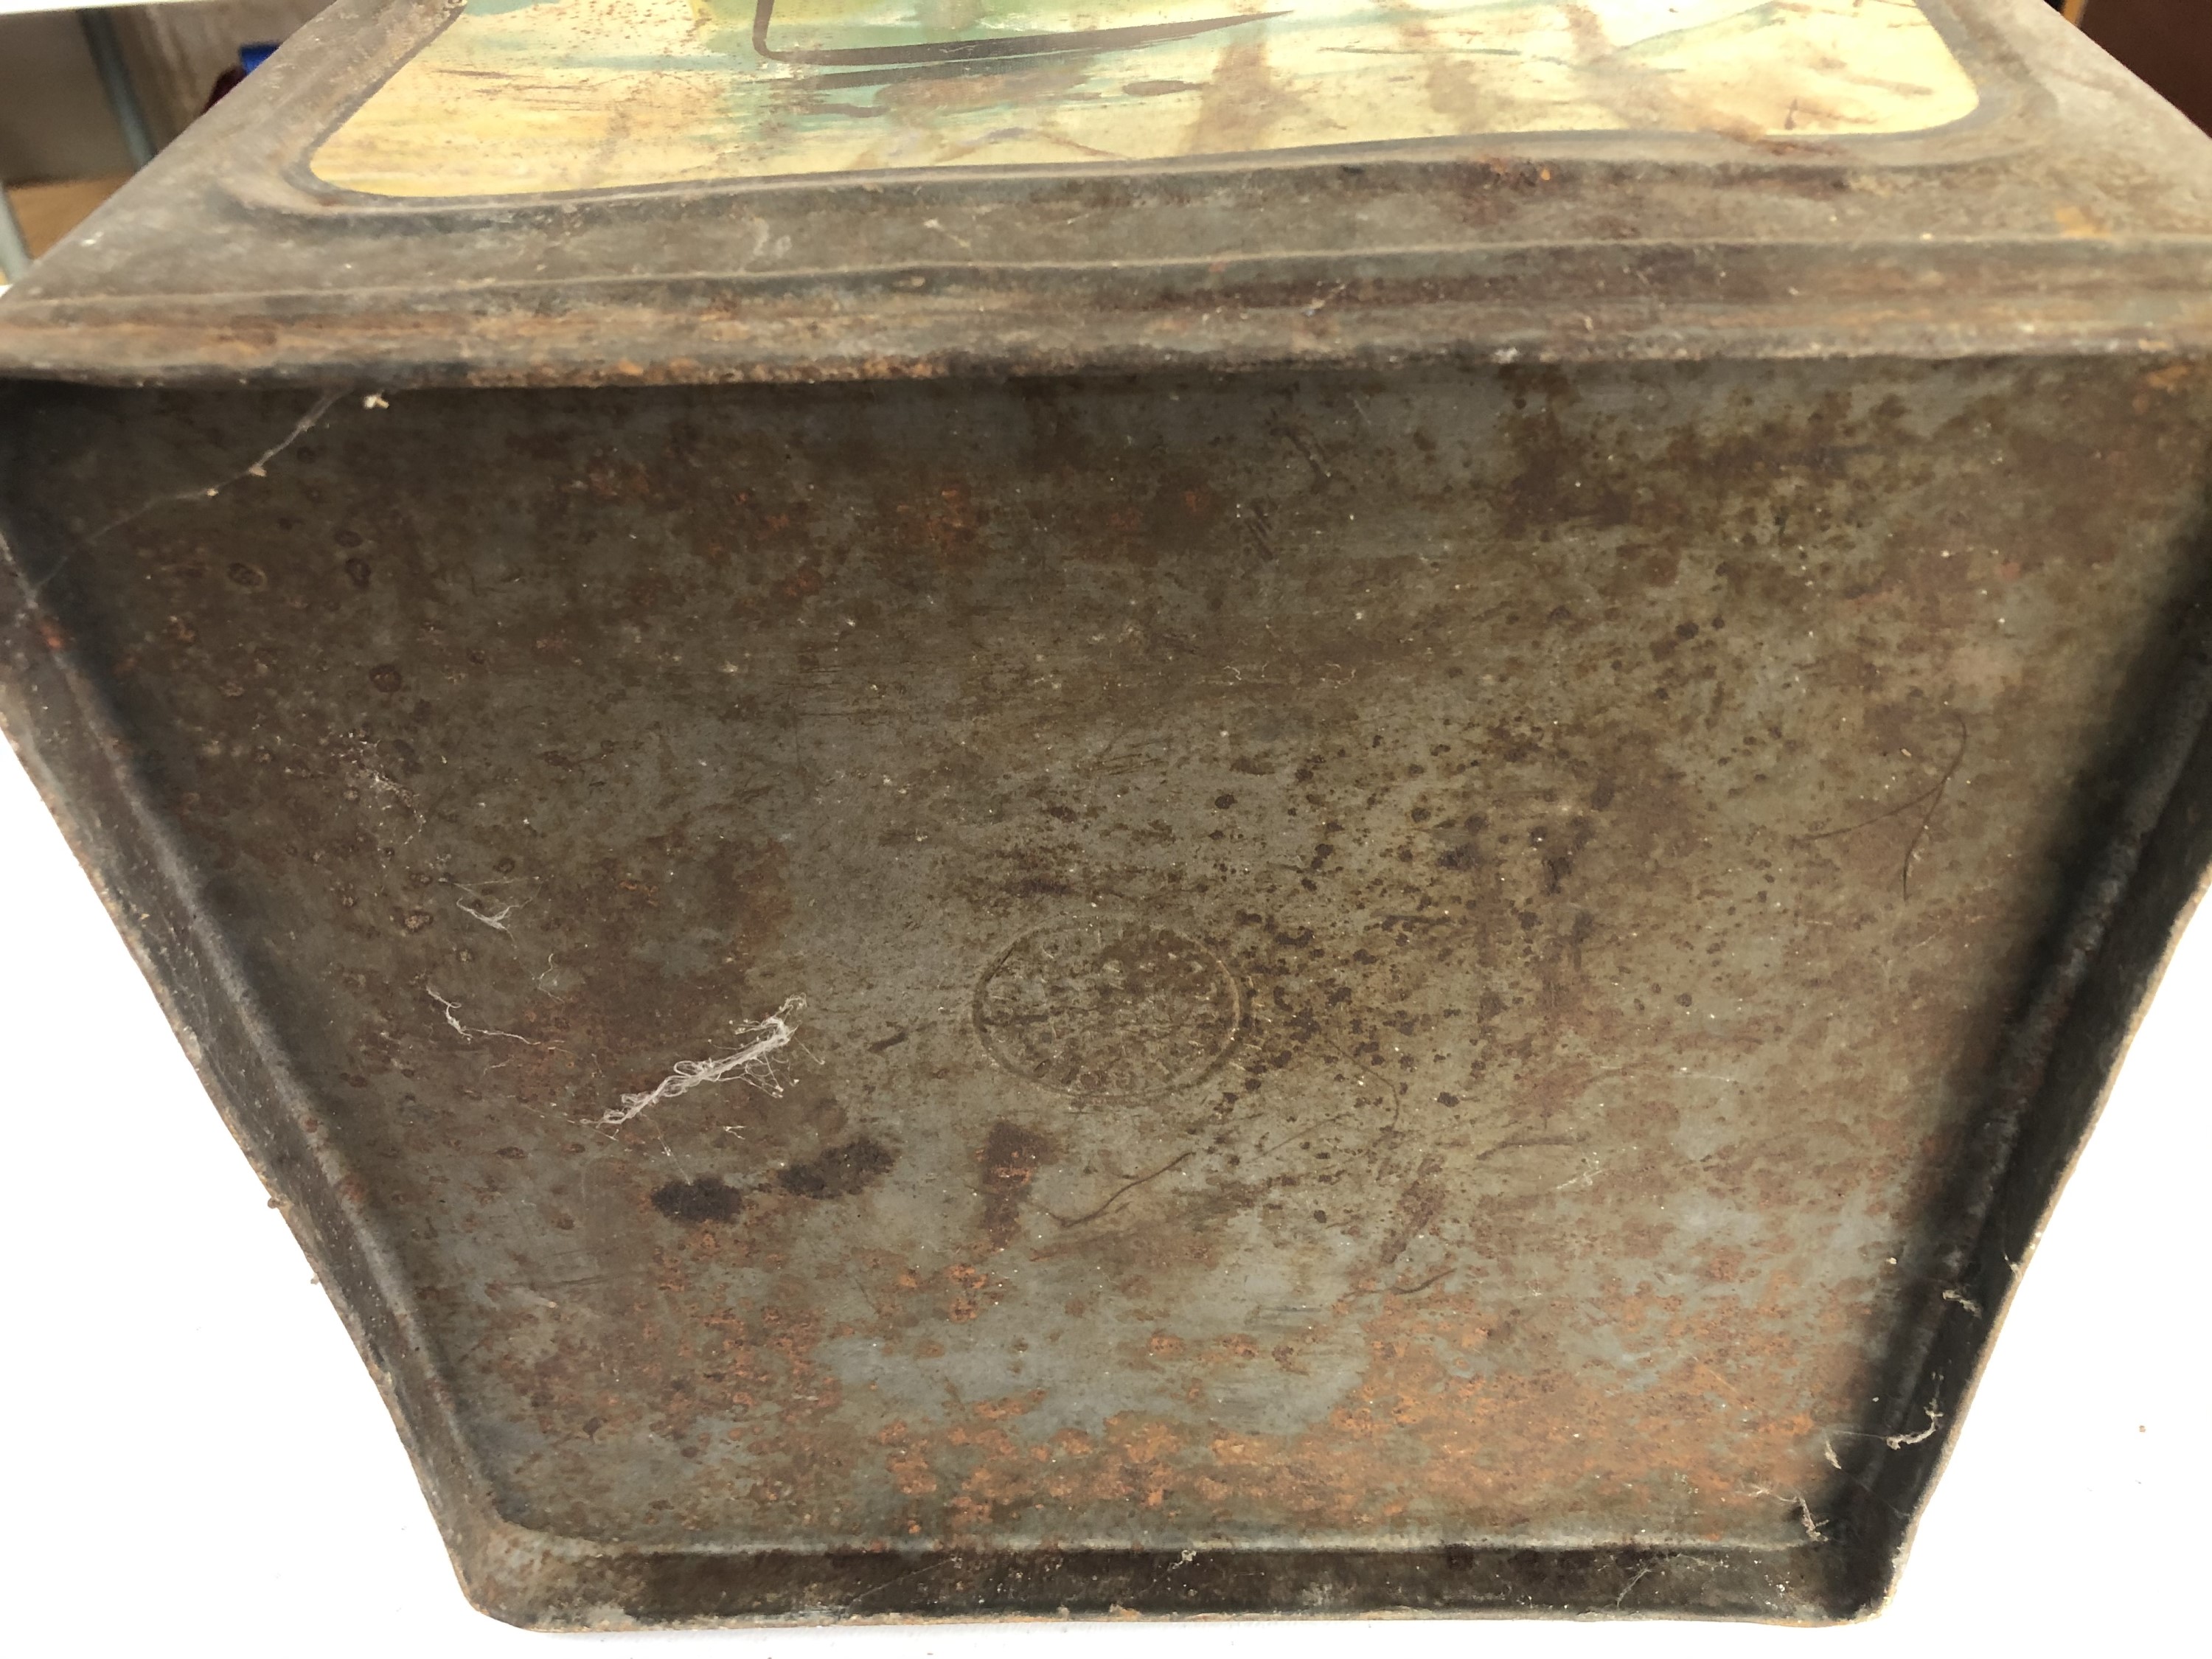 A 1930s Gamages 5-gallon fuel oil can, of so-called "pyramid" form, lithographically printed in - Image 6 of 8